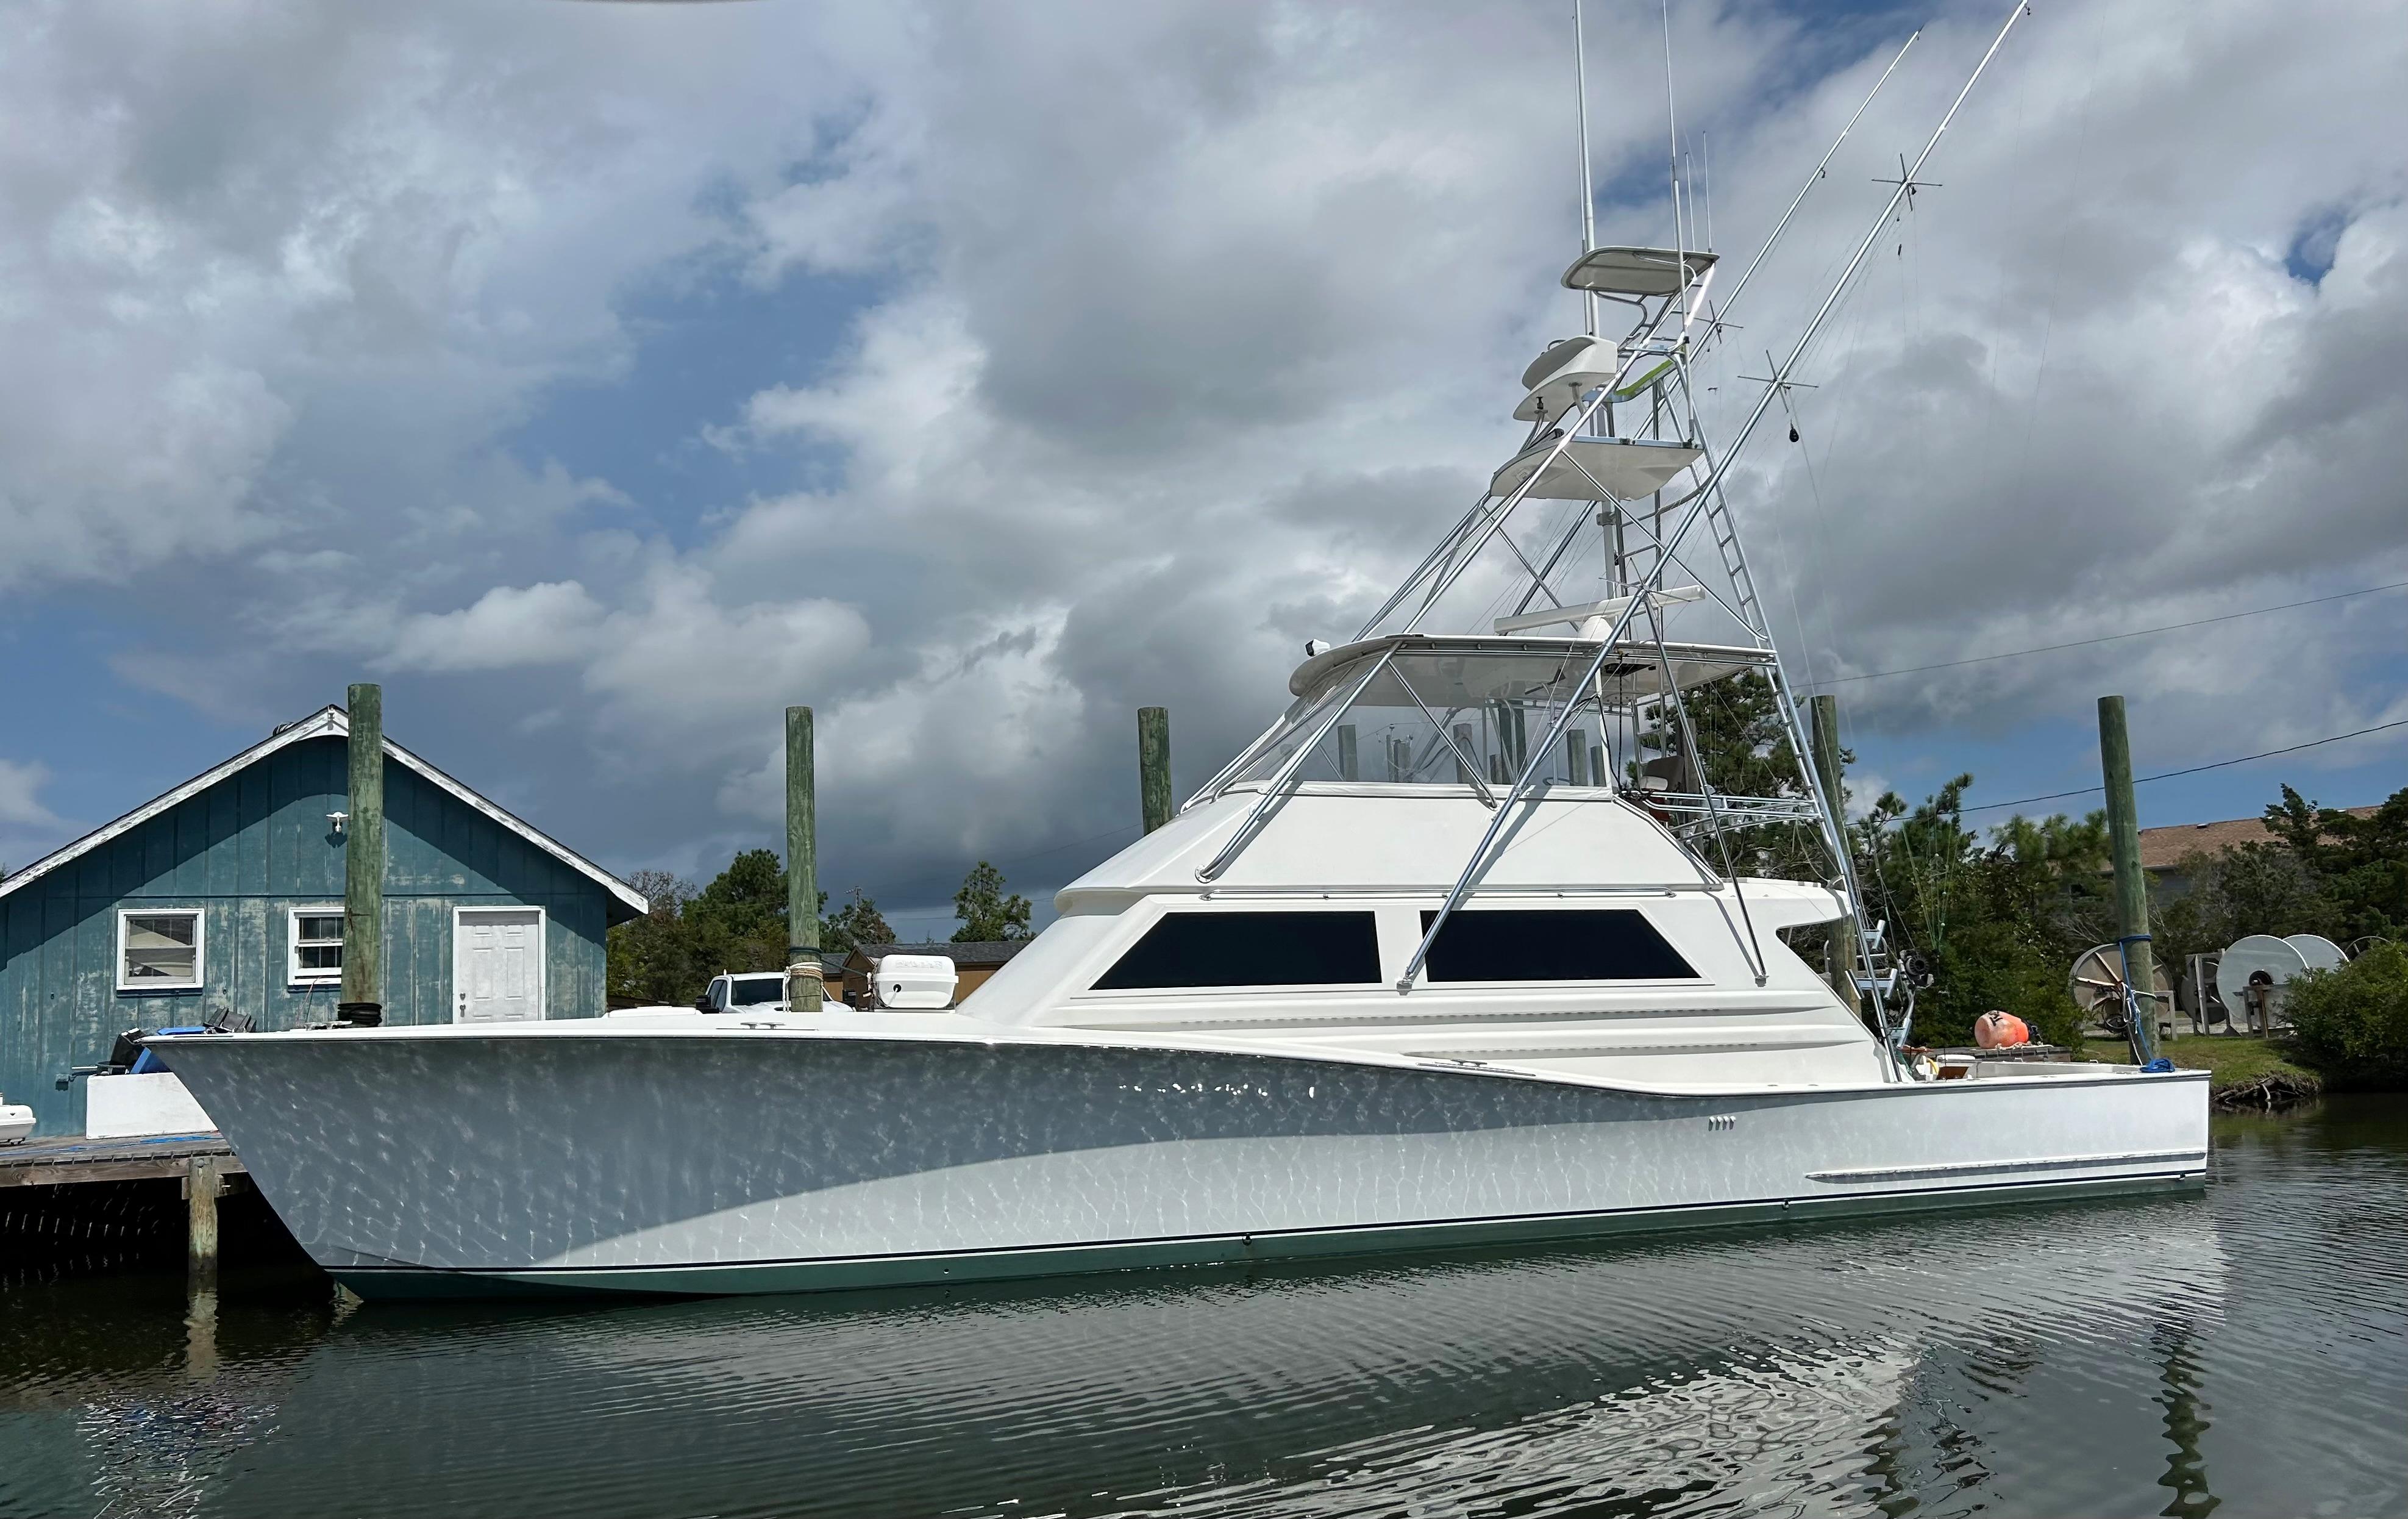 Little Shell Yacht for Sale  53 Monterey Yachts Wanchese, NC